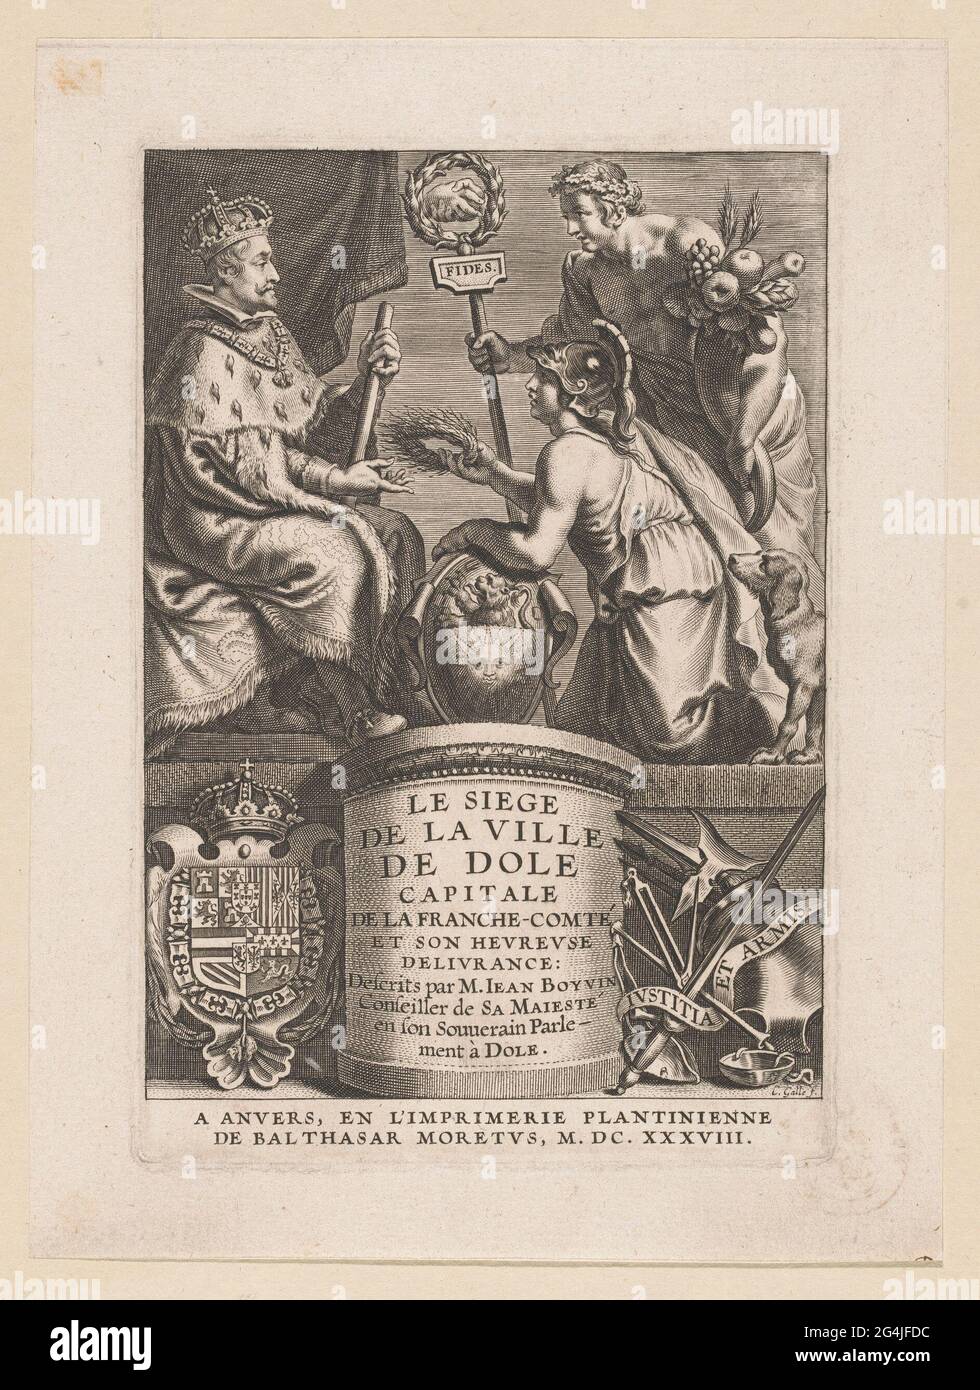 The city Dole hands over Philip IV a wreath; Title page for: J. Boyvin, Le Siege de la Ville de Dole, Antwerp: 1638 .. The personification of the city Dole, a kneeling woman with the city weapa, hand over Philip IV a wreath of ears of corn. Philip IV receives the wreath, he sits on a throne with a command stove in his hand. Behind the city Dole is a young man who symbolizes the recovery of the city after siege. Under the arm of the house Habsburg and on the right the motto of the city of Dole: Iustitia et Armis. Stock Photo